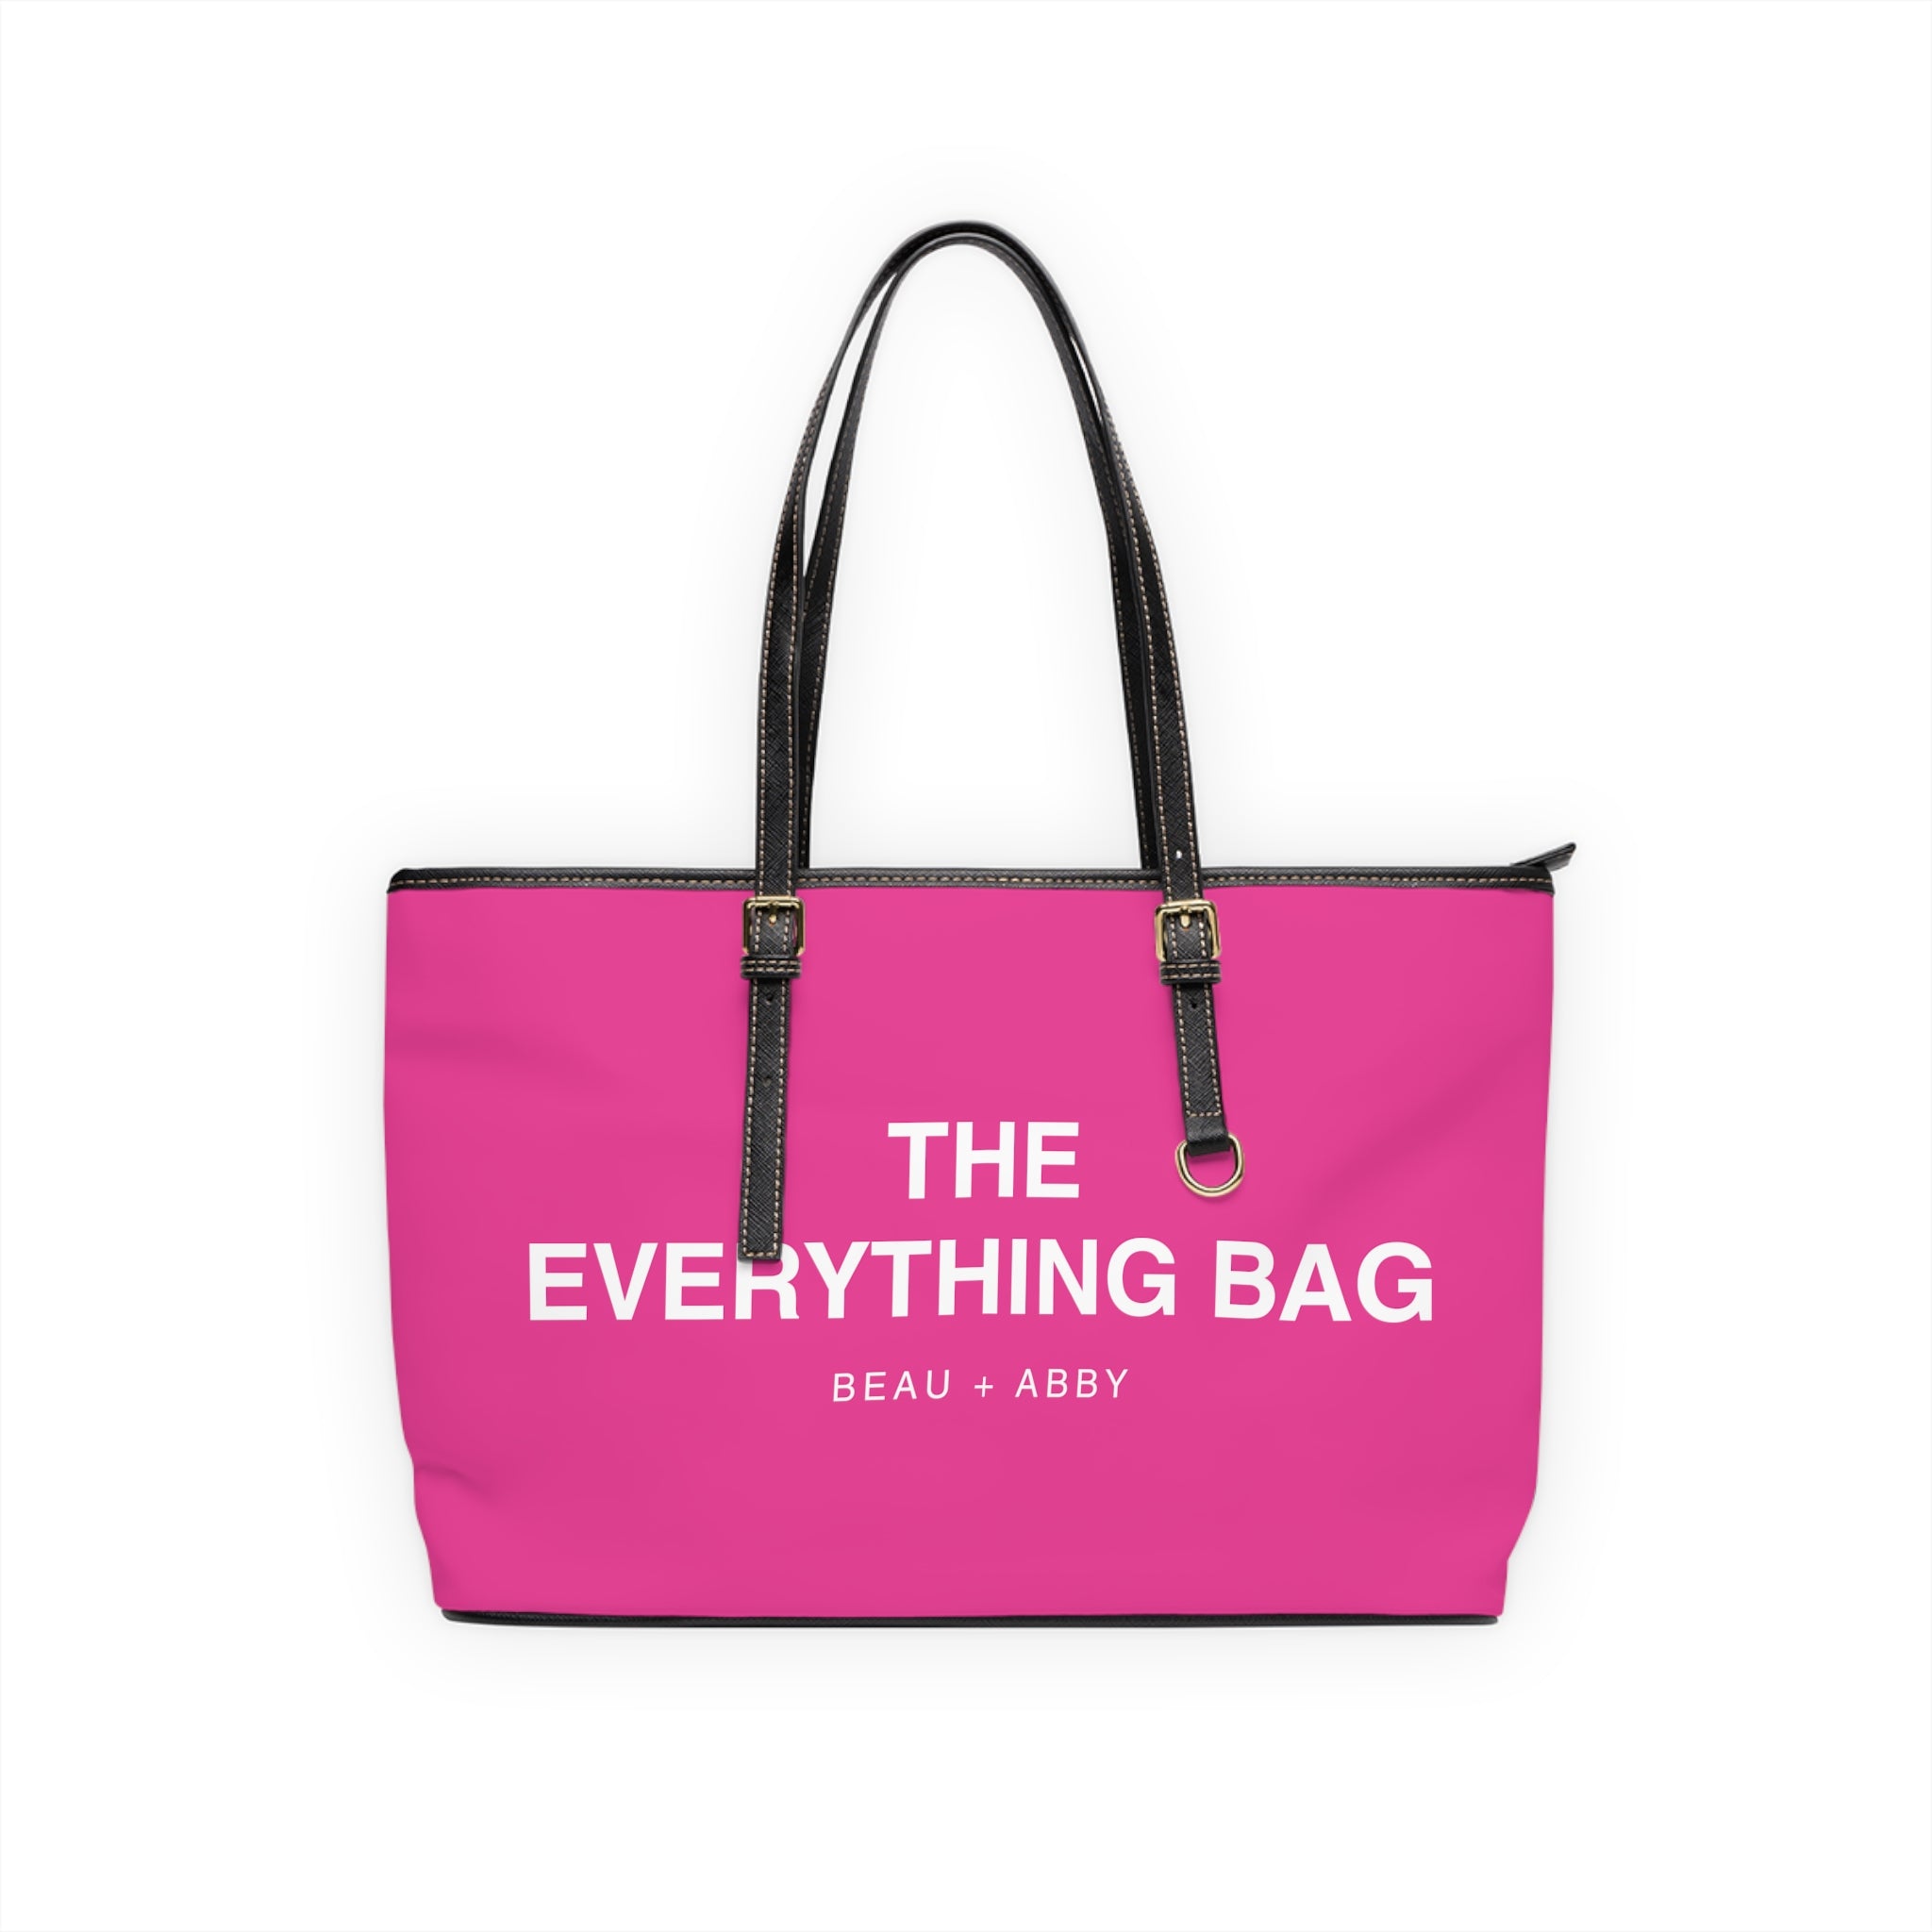  Casual Wear Accessories "Everything Bag" PU Leather Shoulder Bag in Barbie Pink, Tote Bag Bags